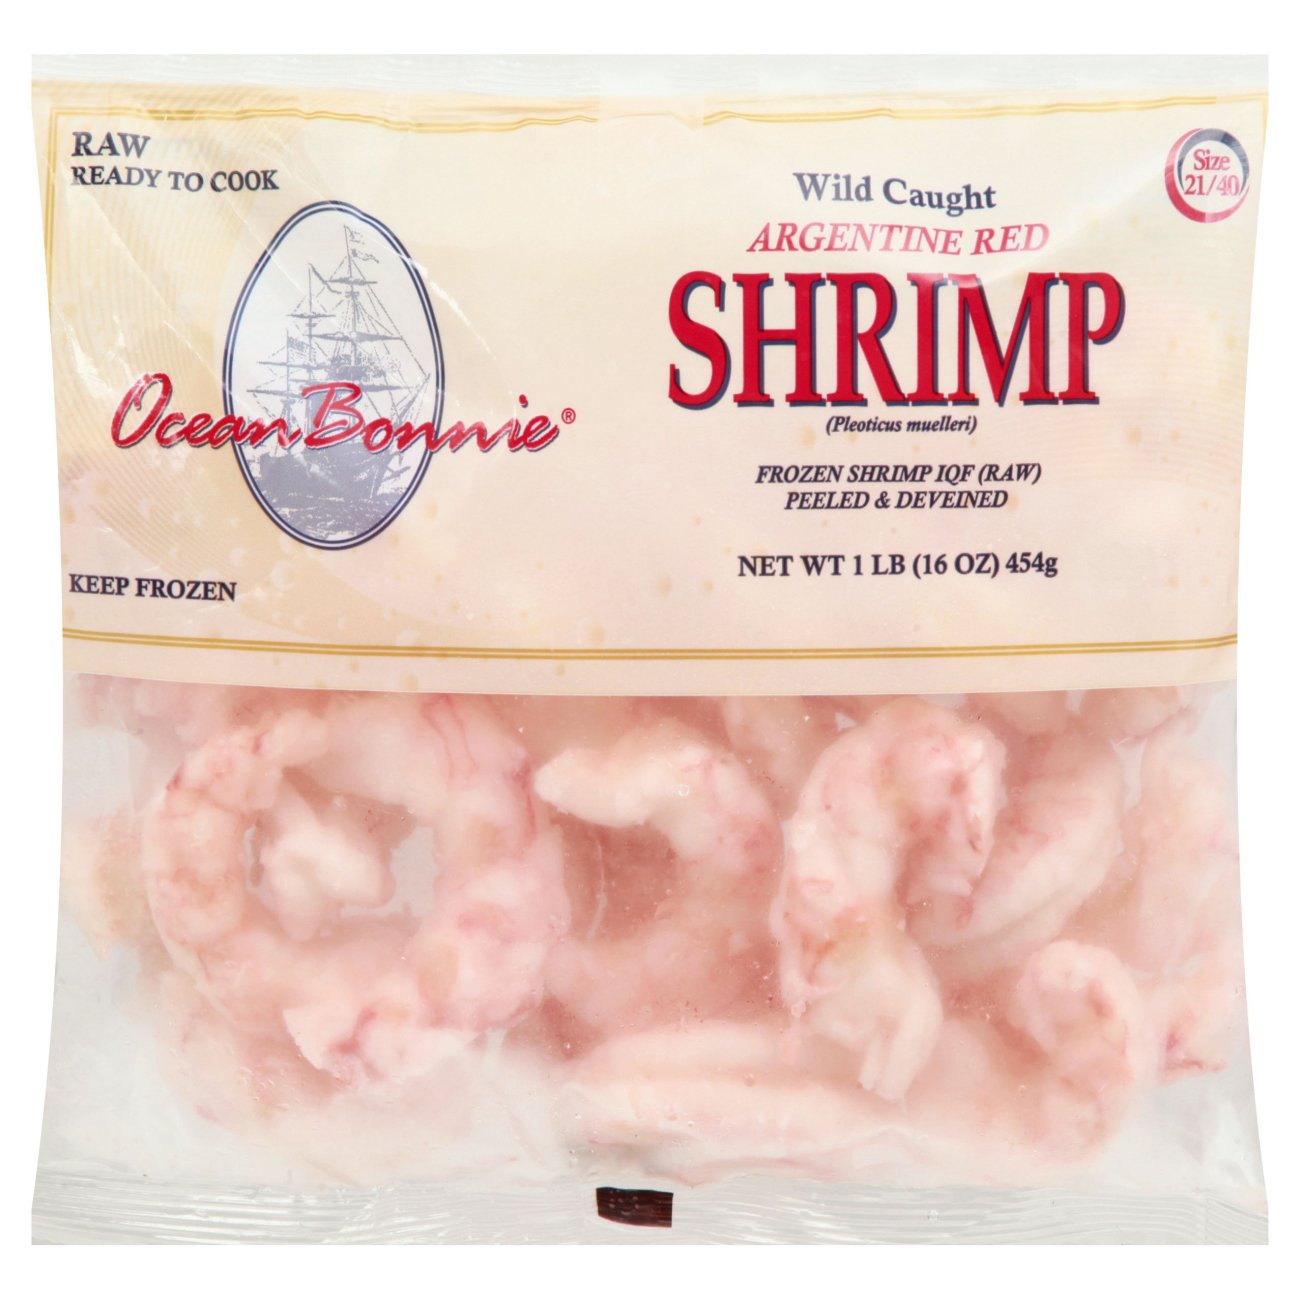 Ocean Bonnie Raw Peeled And Deveined Wild Caught Argentine Red Shrimp 21 40ct Lb Shop Seafood At H E B